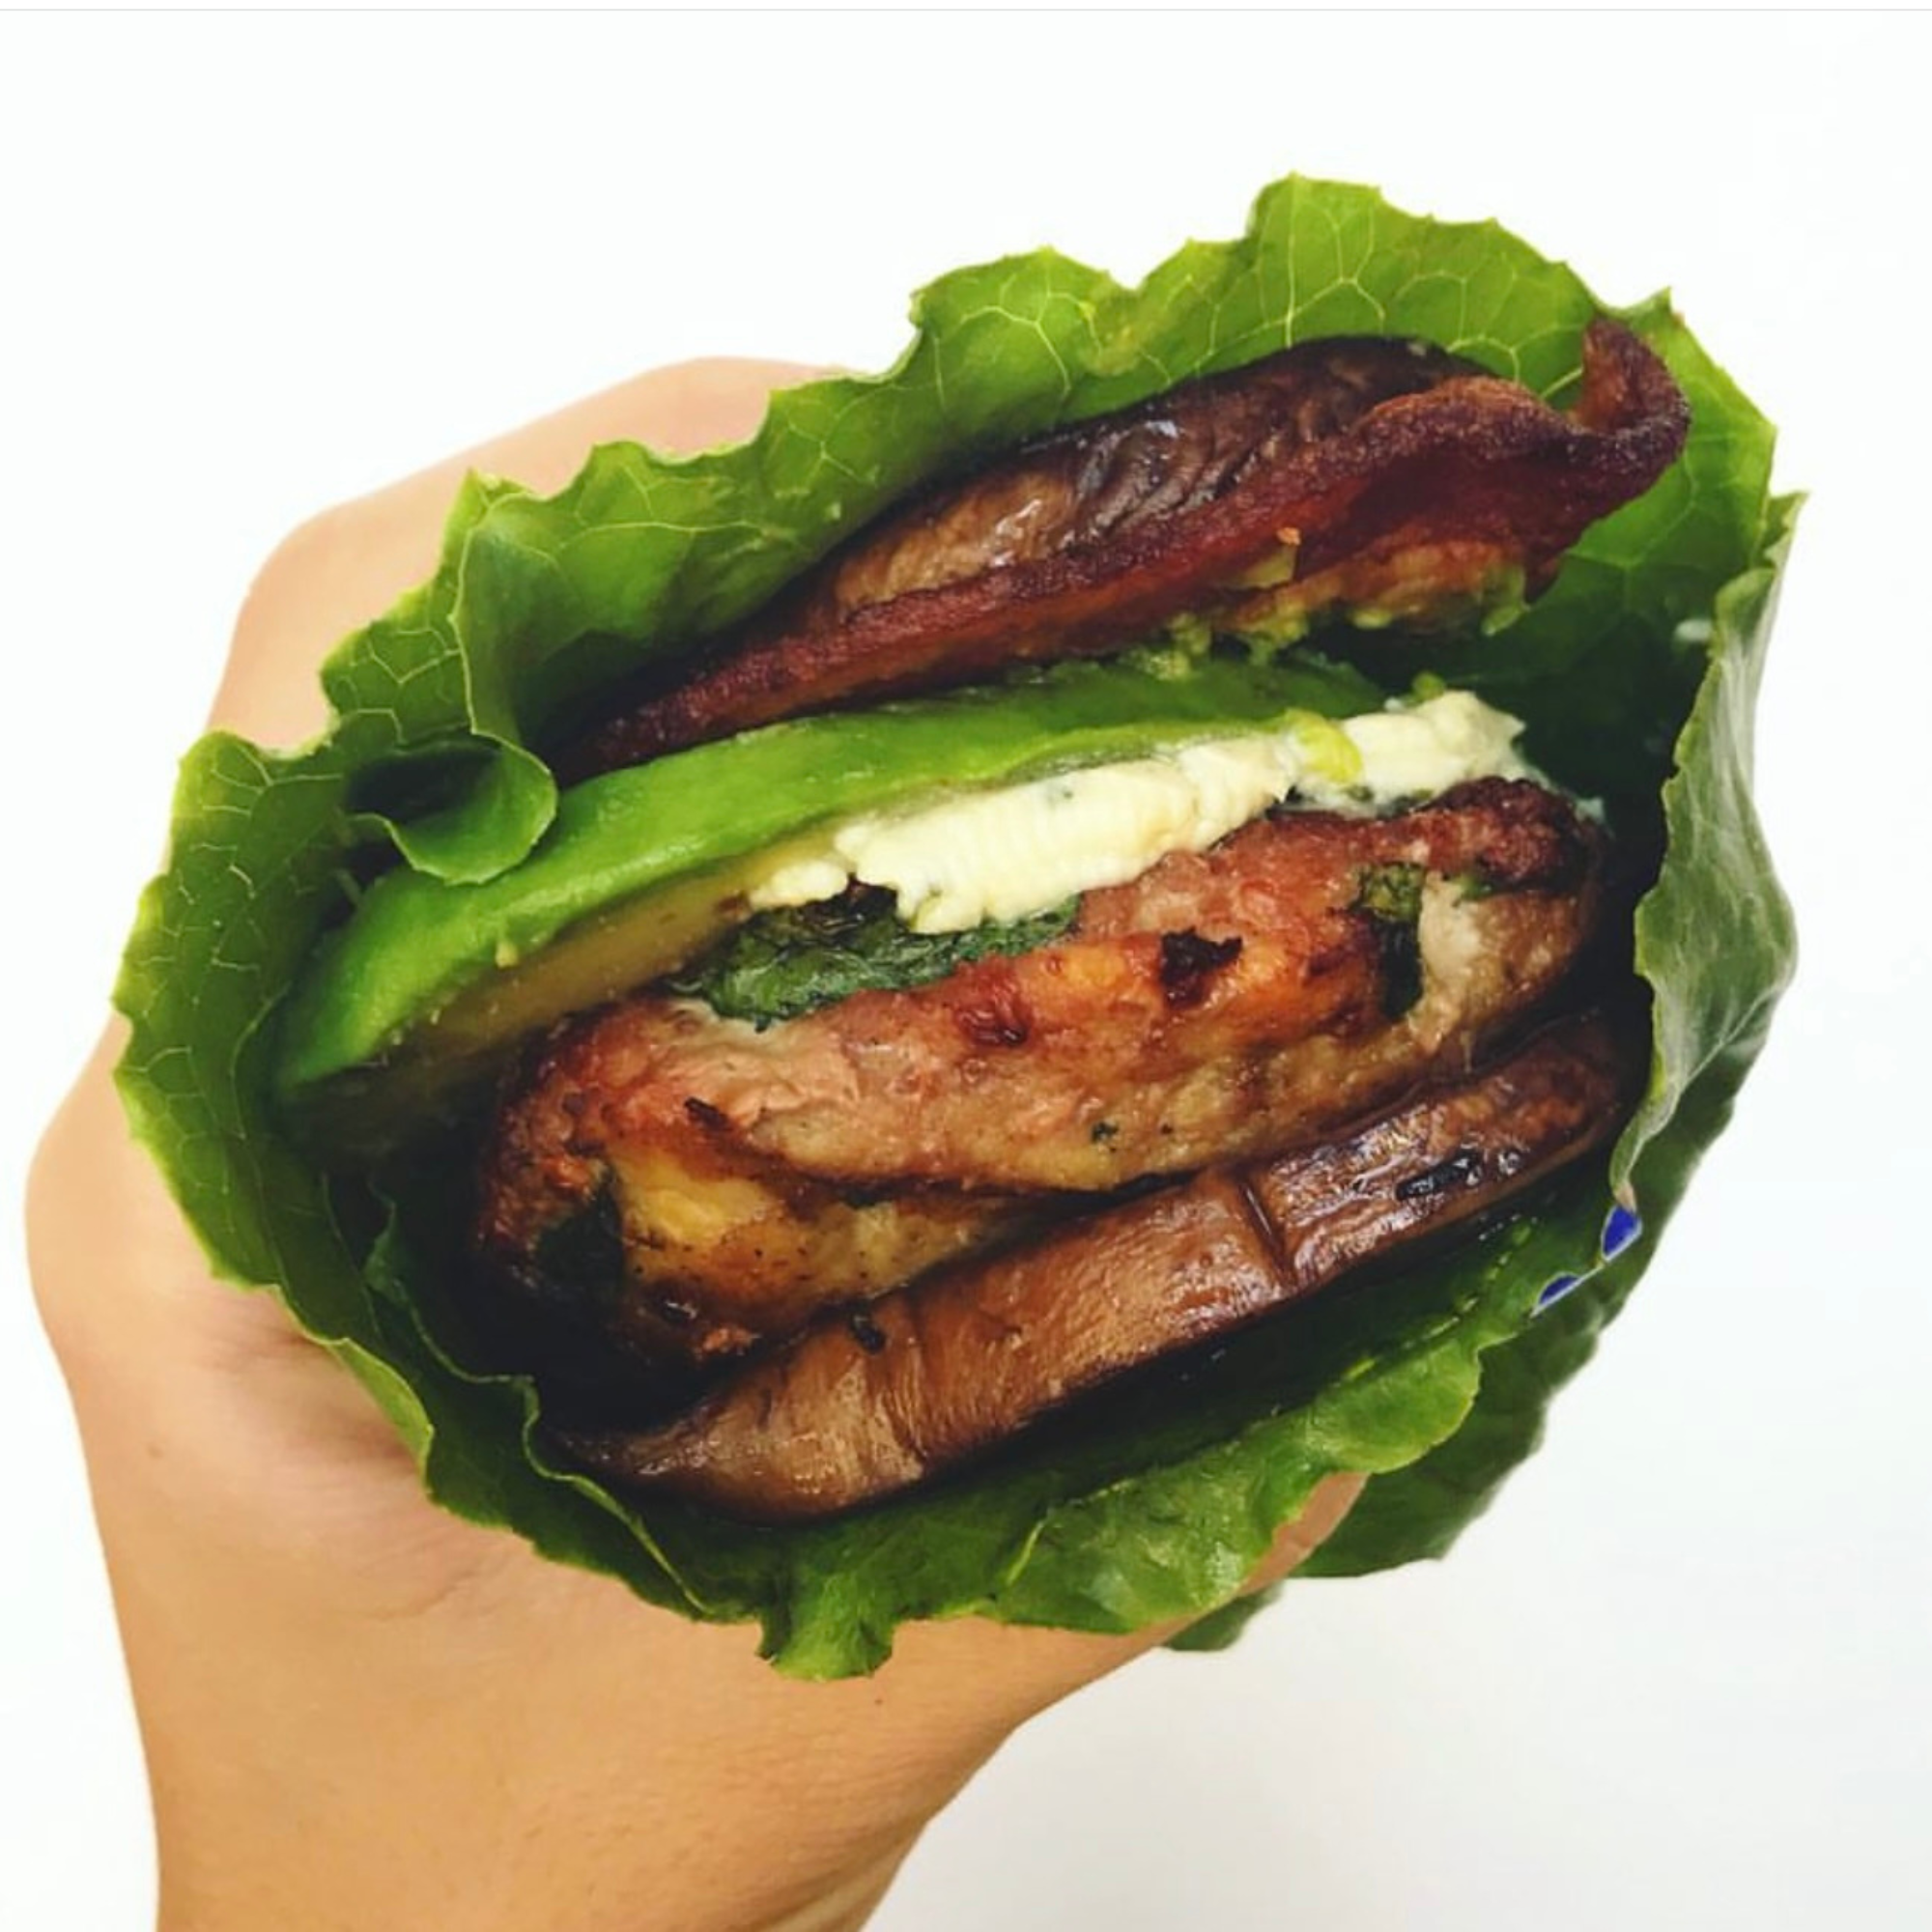 a hand holding a loaded lettuce wrapped turkey burger that is stuffed with sautéed portobello mushrooms, bacon, avocado all wrapped up in crunchy romaine 